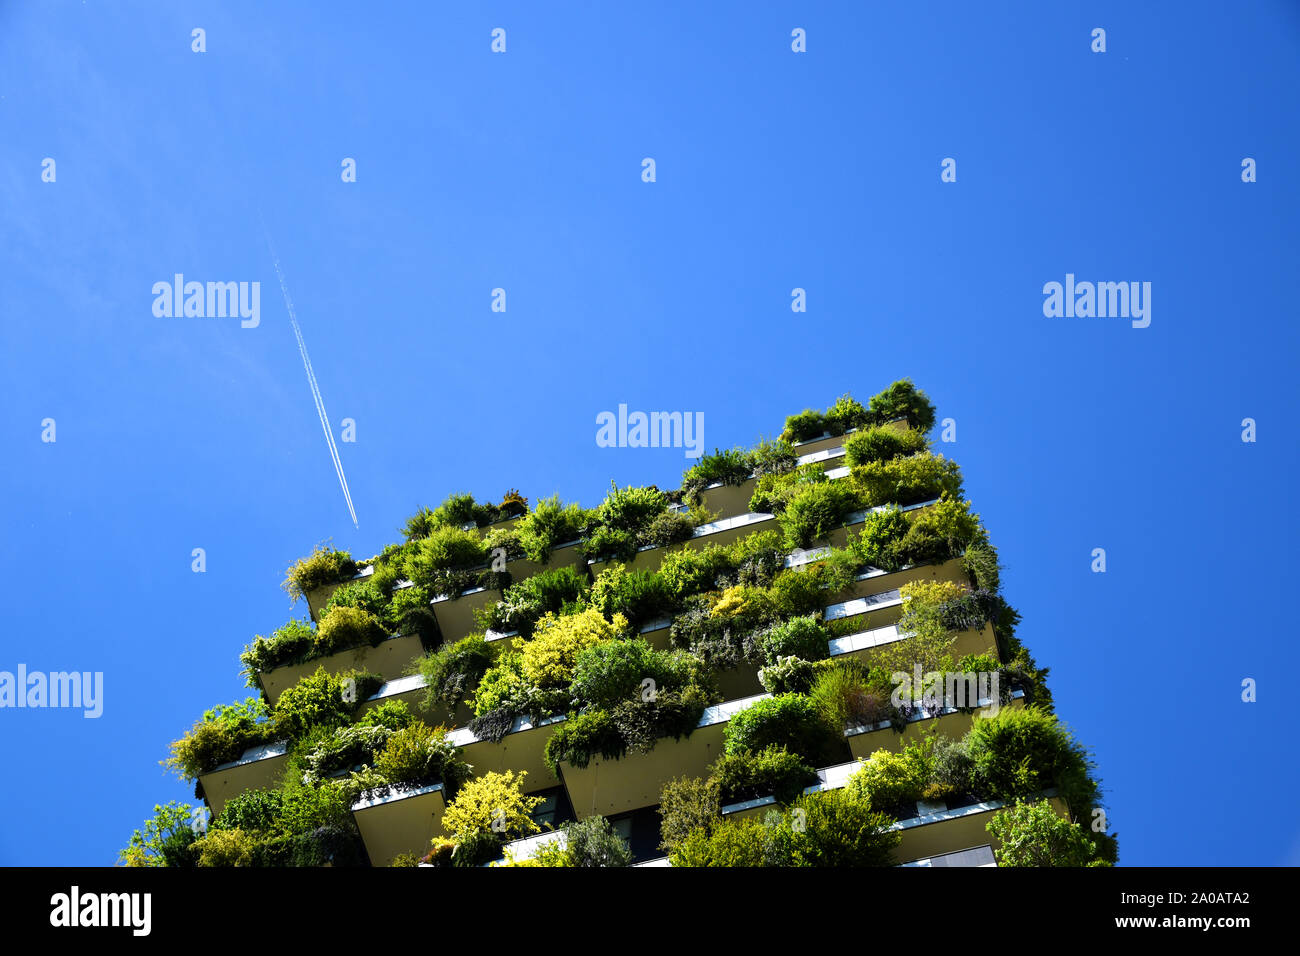 Bosco Verticale (Vertical Forest) is a pair of residential towers (111 and 76 meters height) designed by Stefano Boeri and contain more than 900 trees Stock Photo